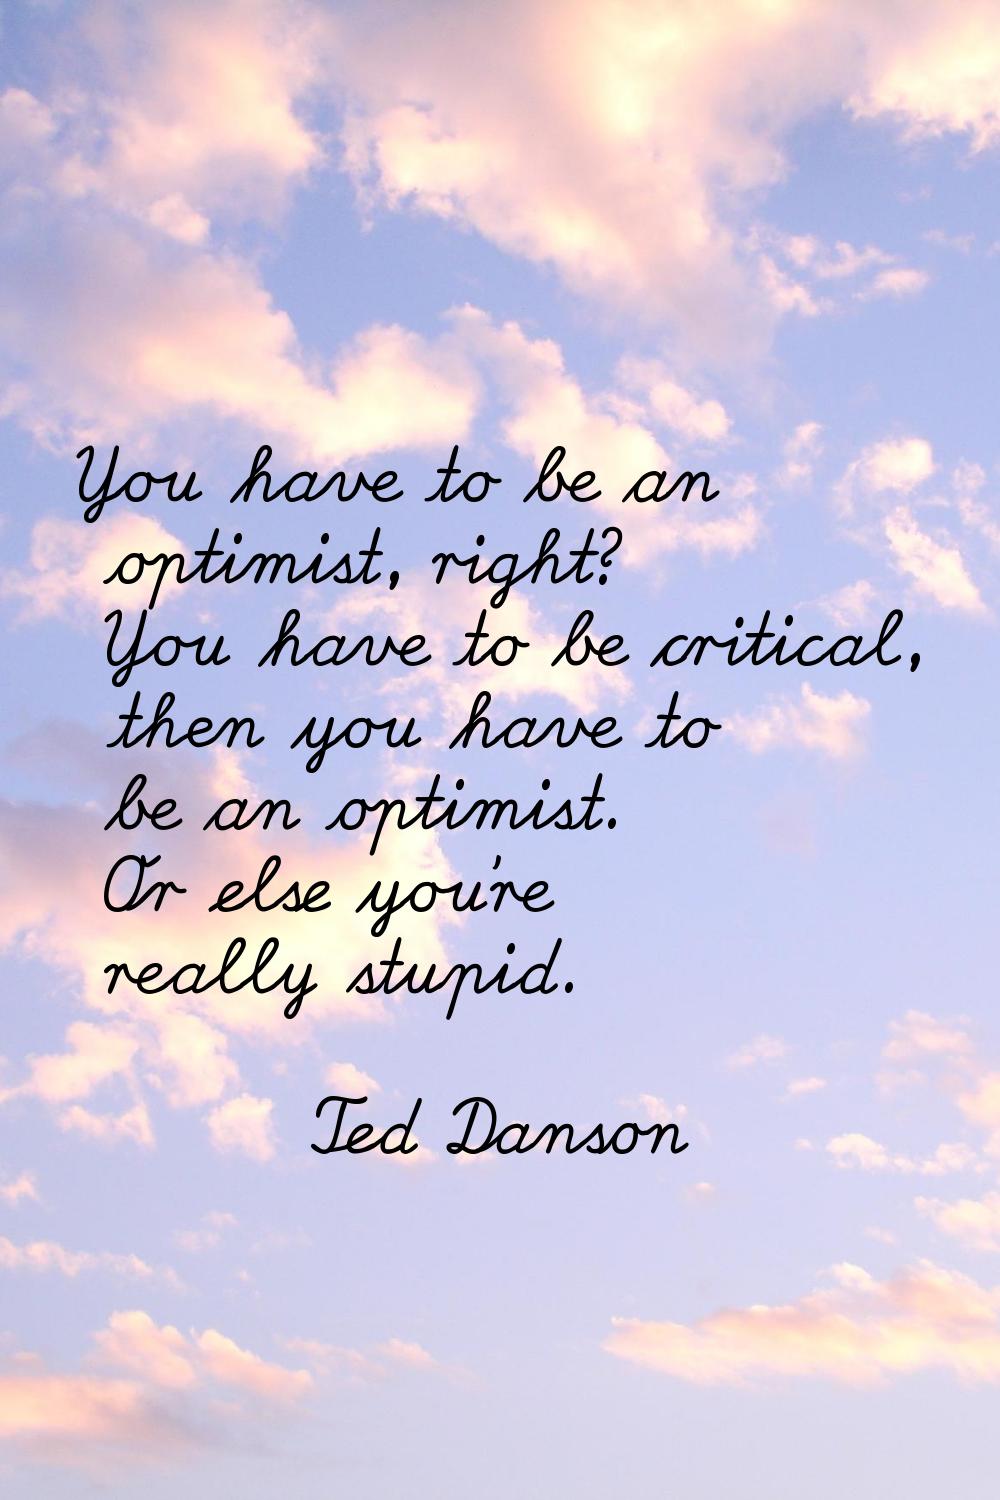 You have to be an optimist, right? You have to be critical, then you have to be an optimist. Or els